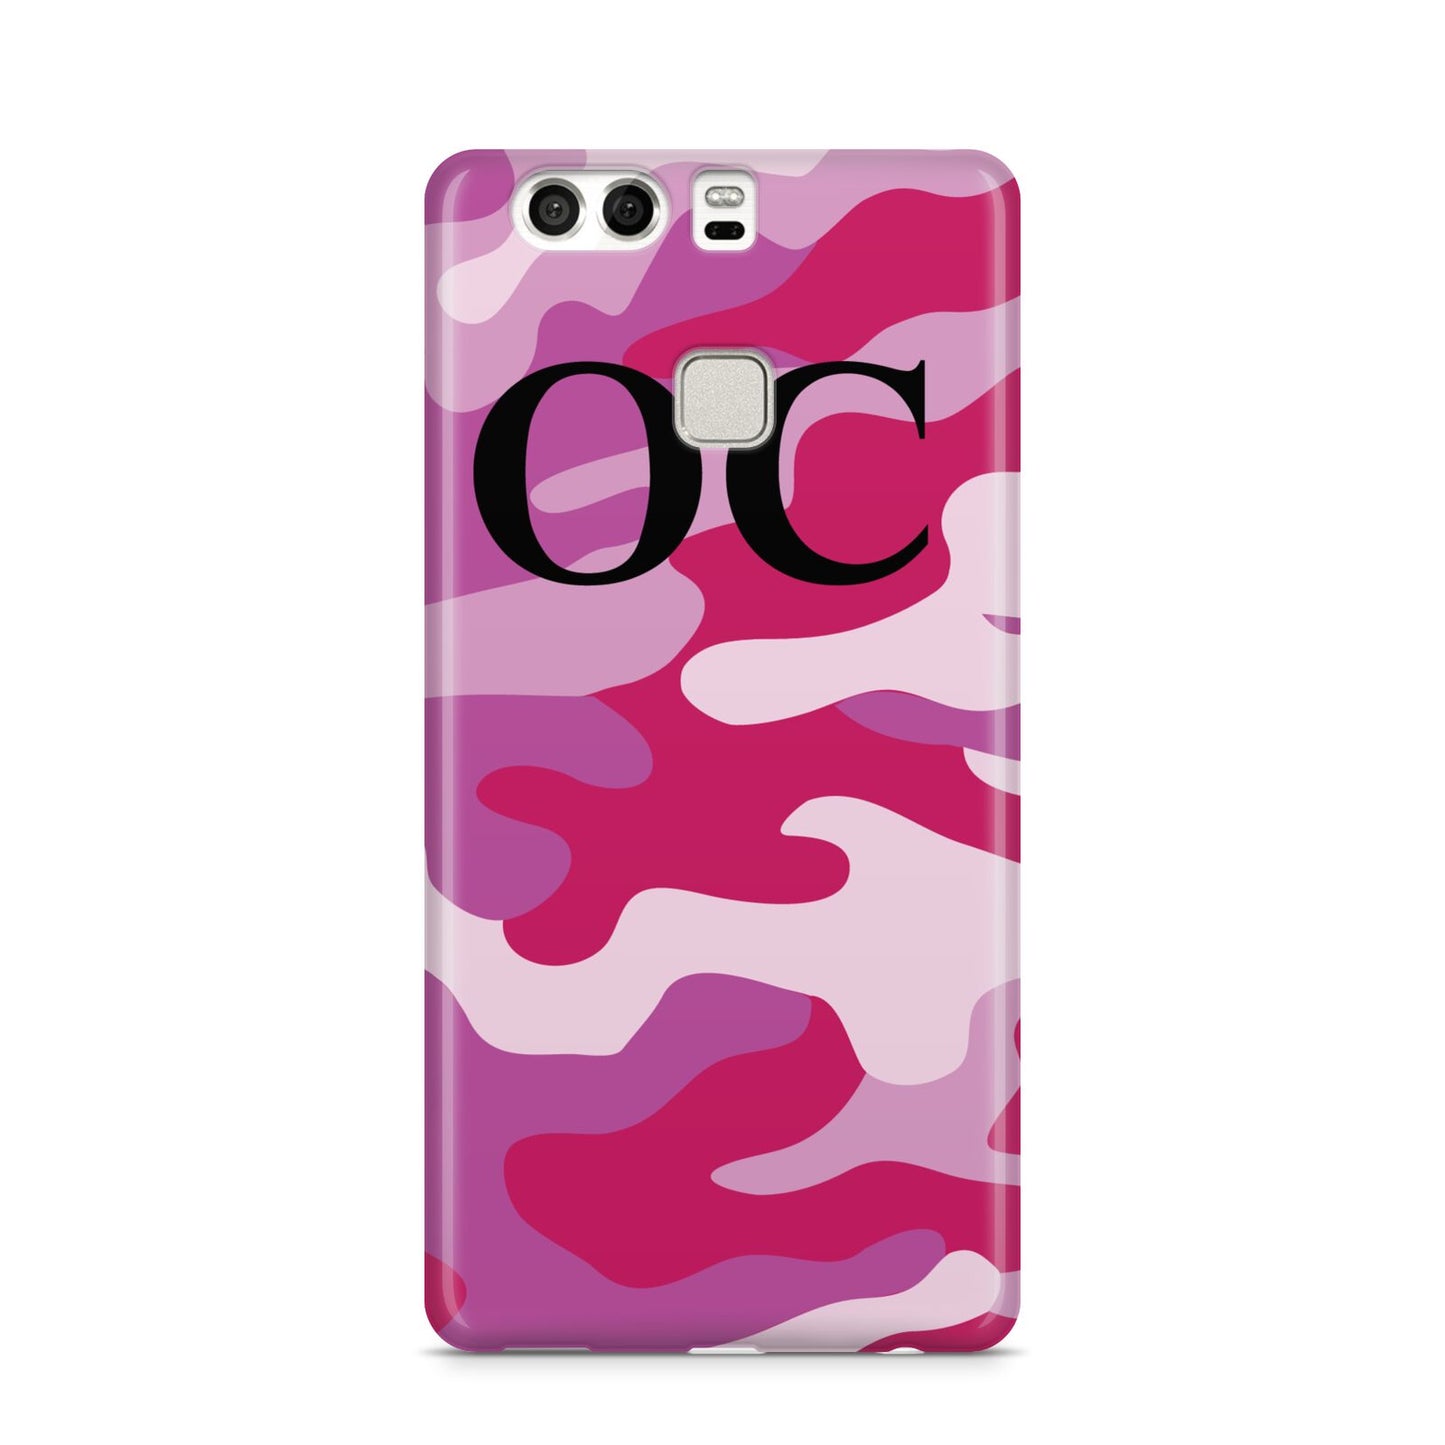 Camouflage Personalised Huawei P9 Case